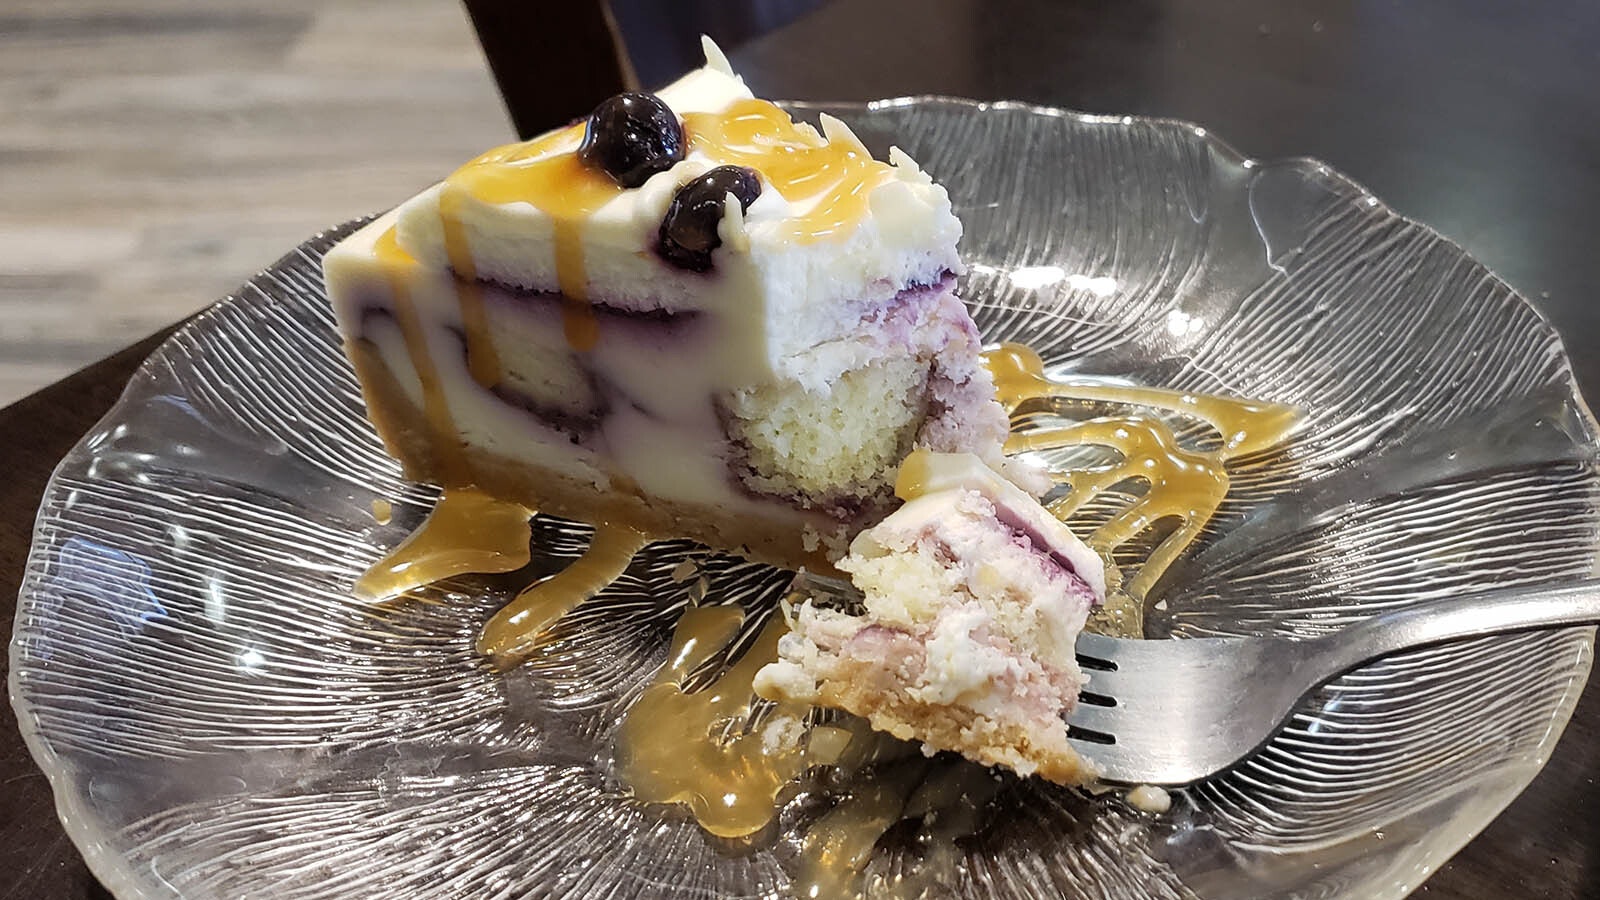 Among the desserts at One Eyed Buffalo is this blueberry caramel cheesecake.